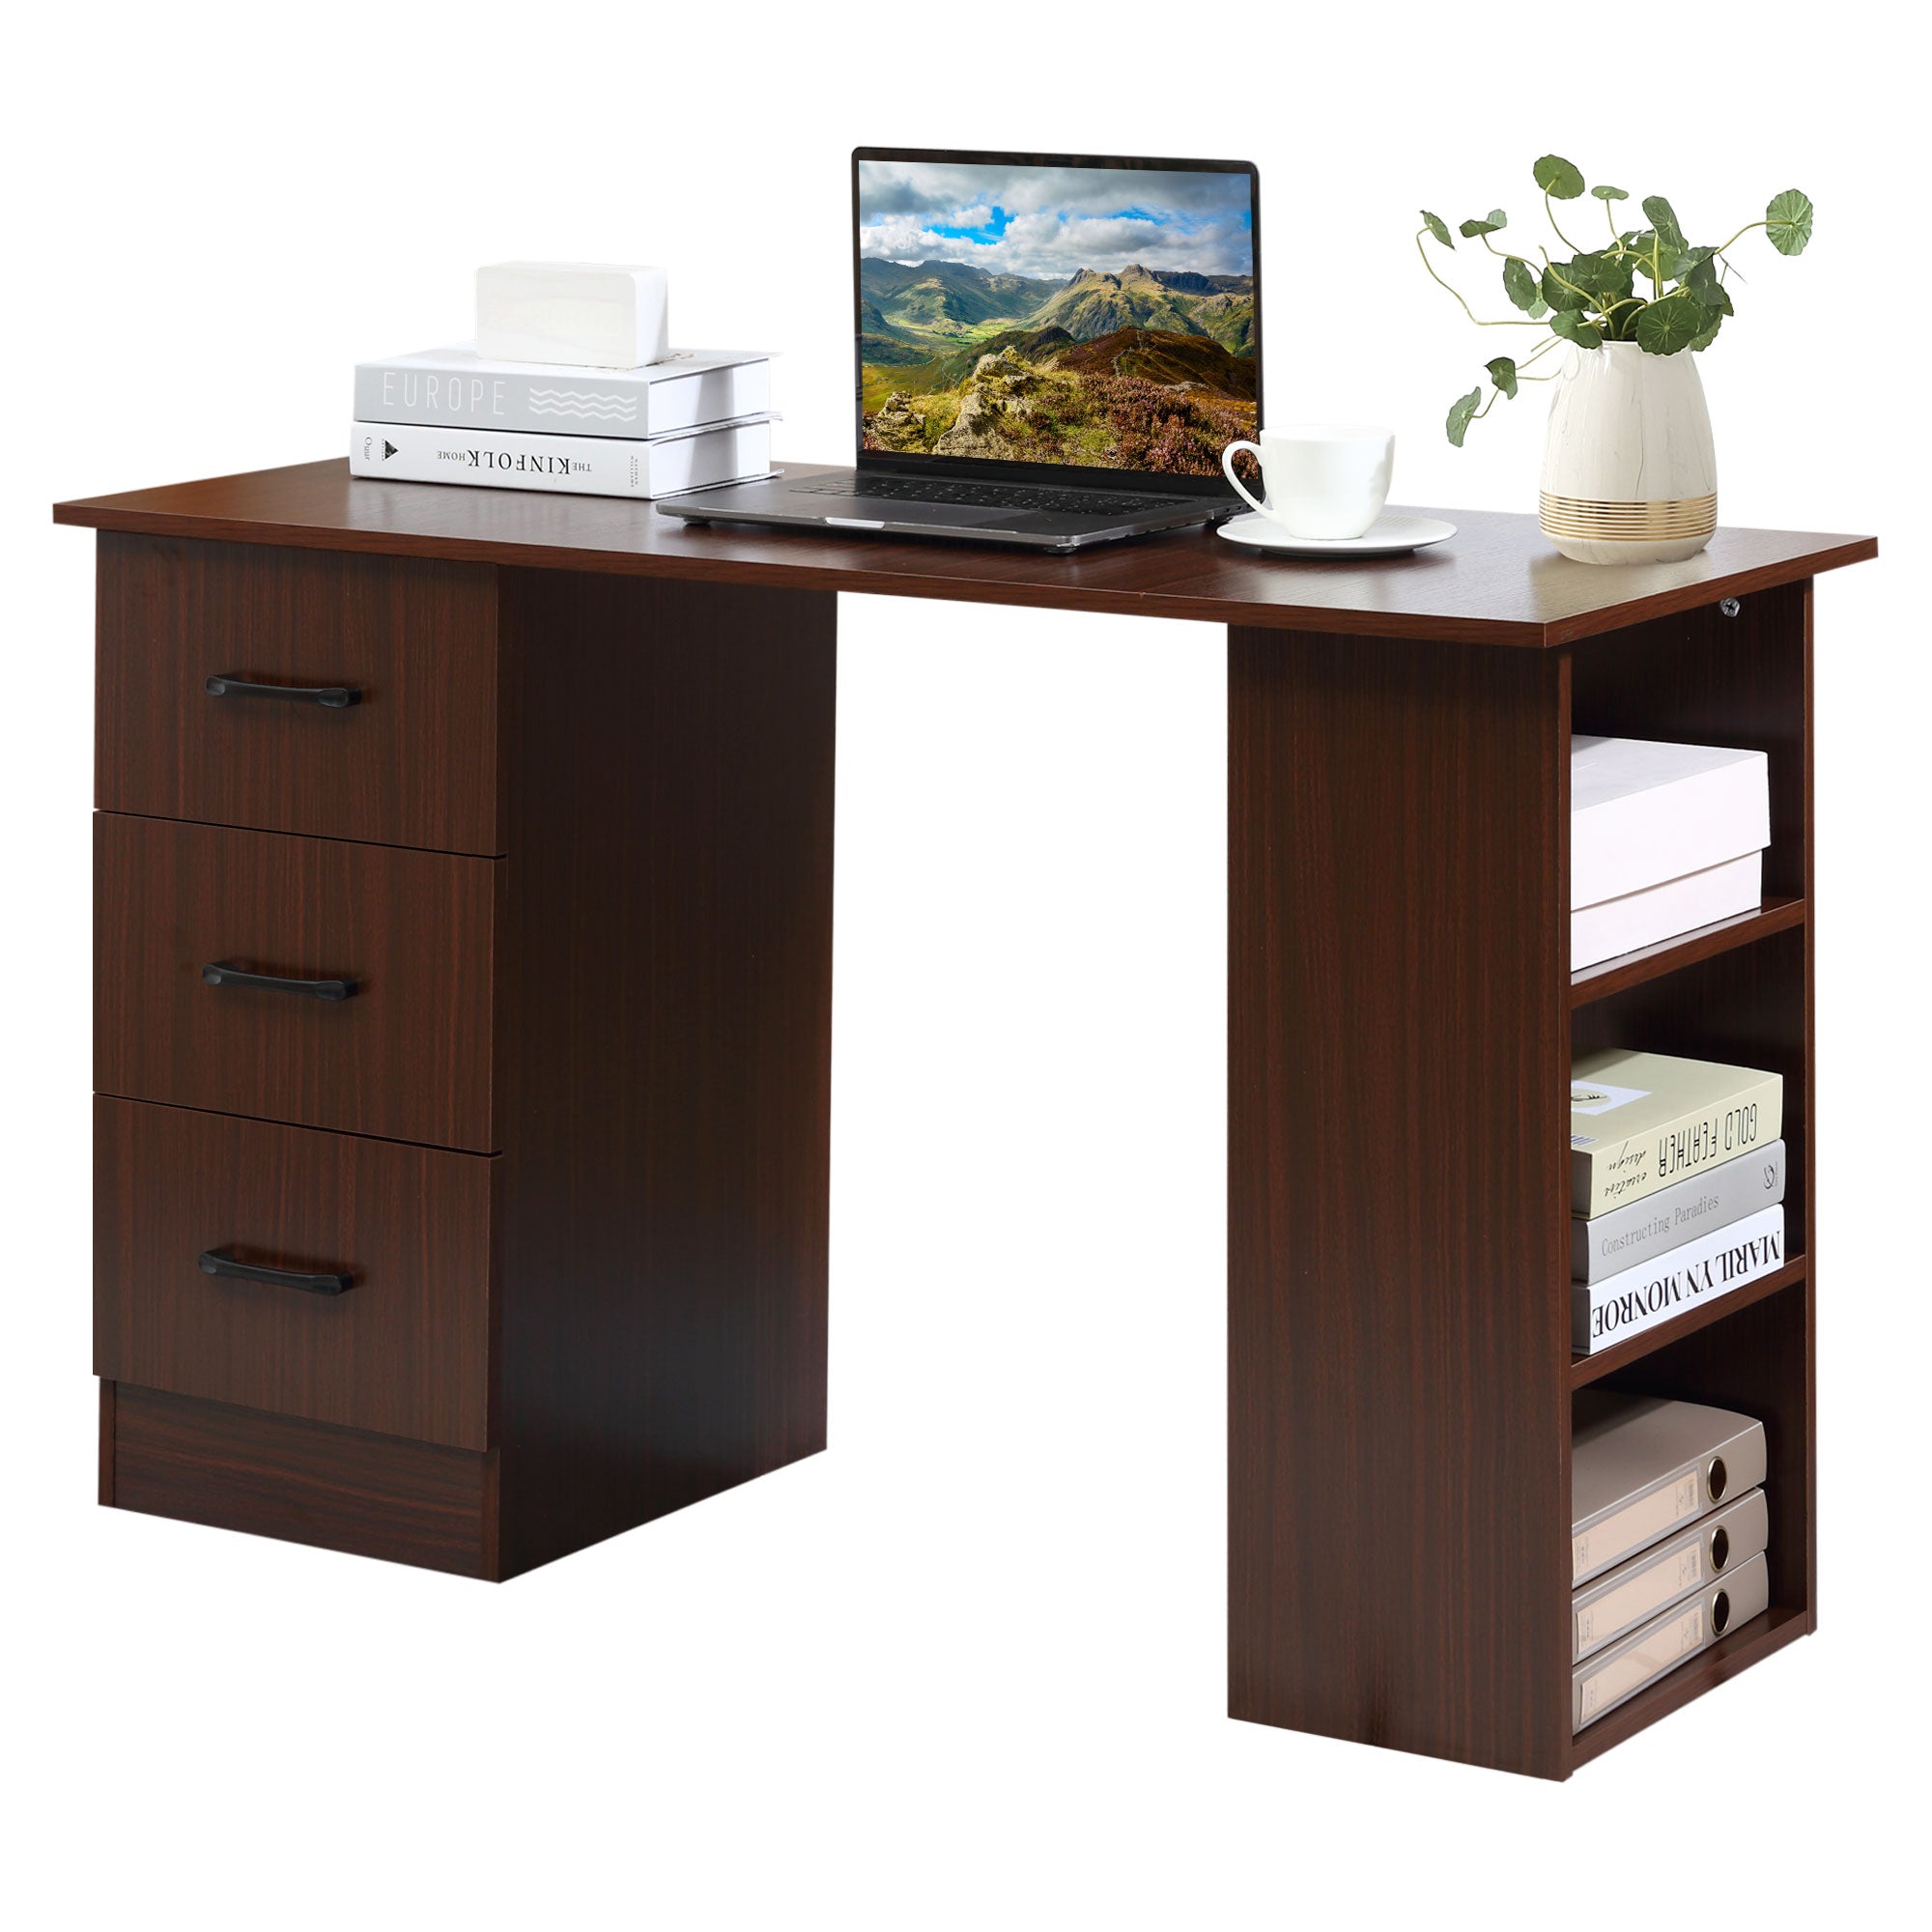 120cm Computer Desk with Storage Shelves Drawers, Writing Table Study Workstation for Home Office, Walnut Brown-1